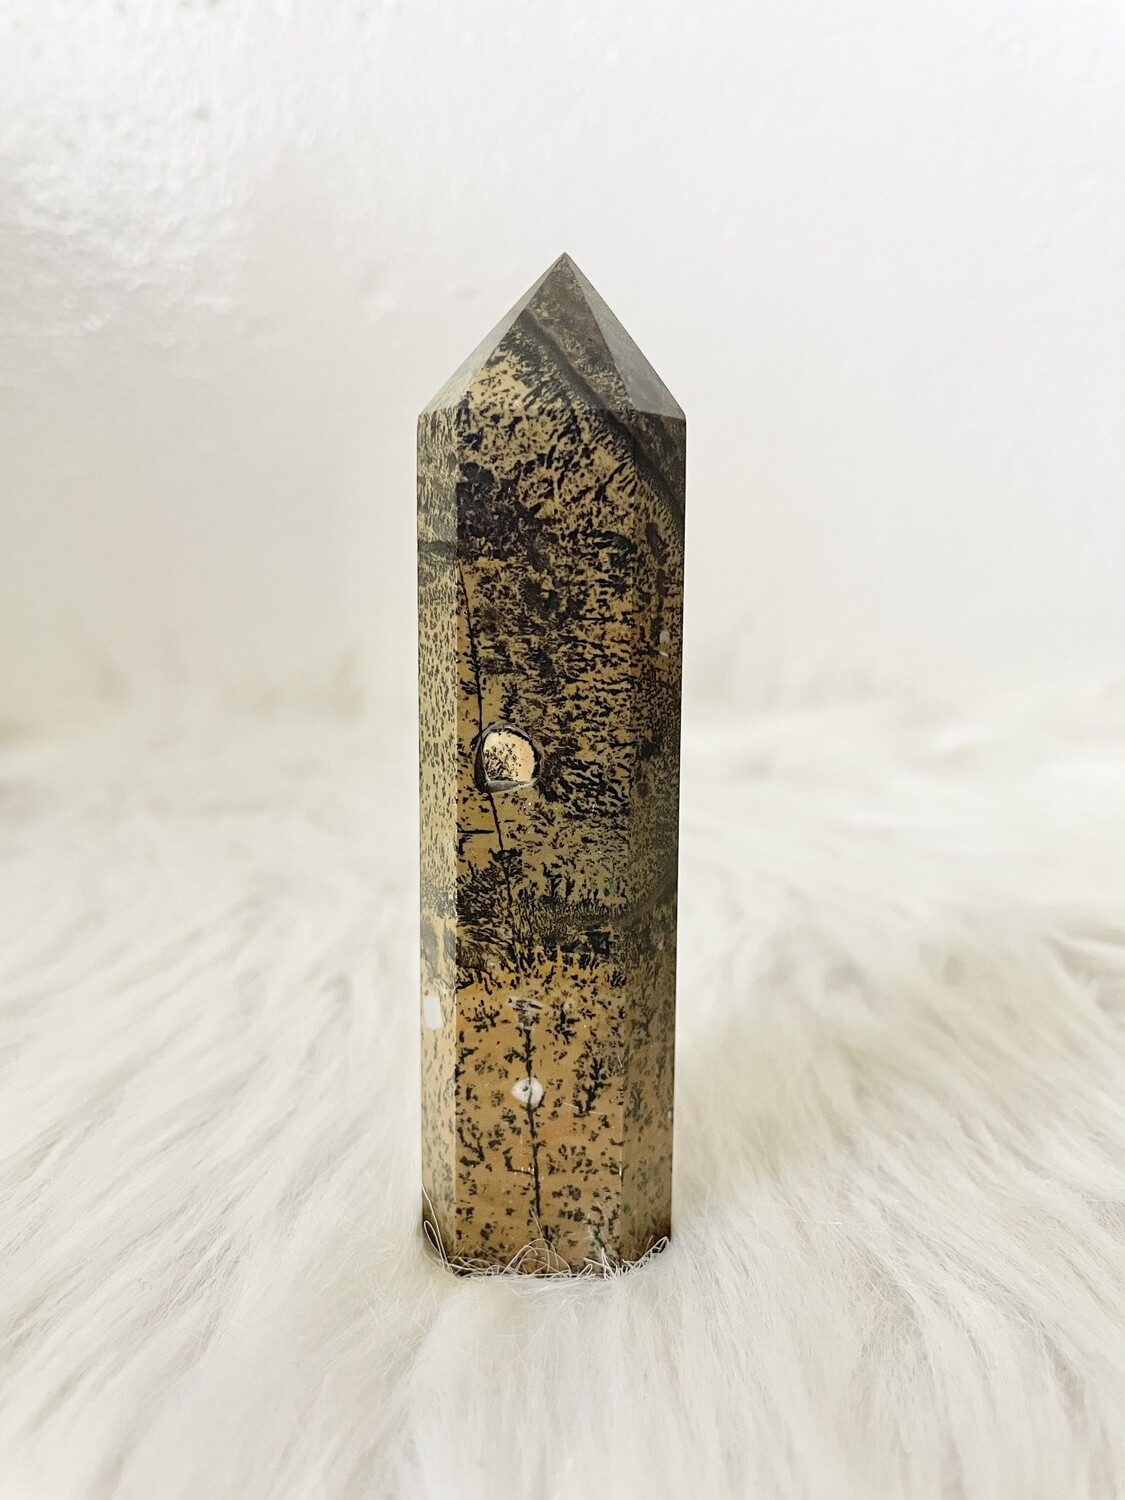 Creepy Forest Picture Jasper Tower